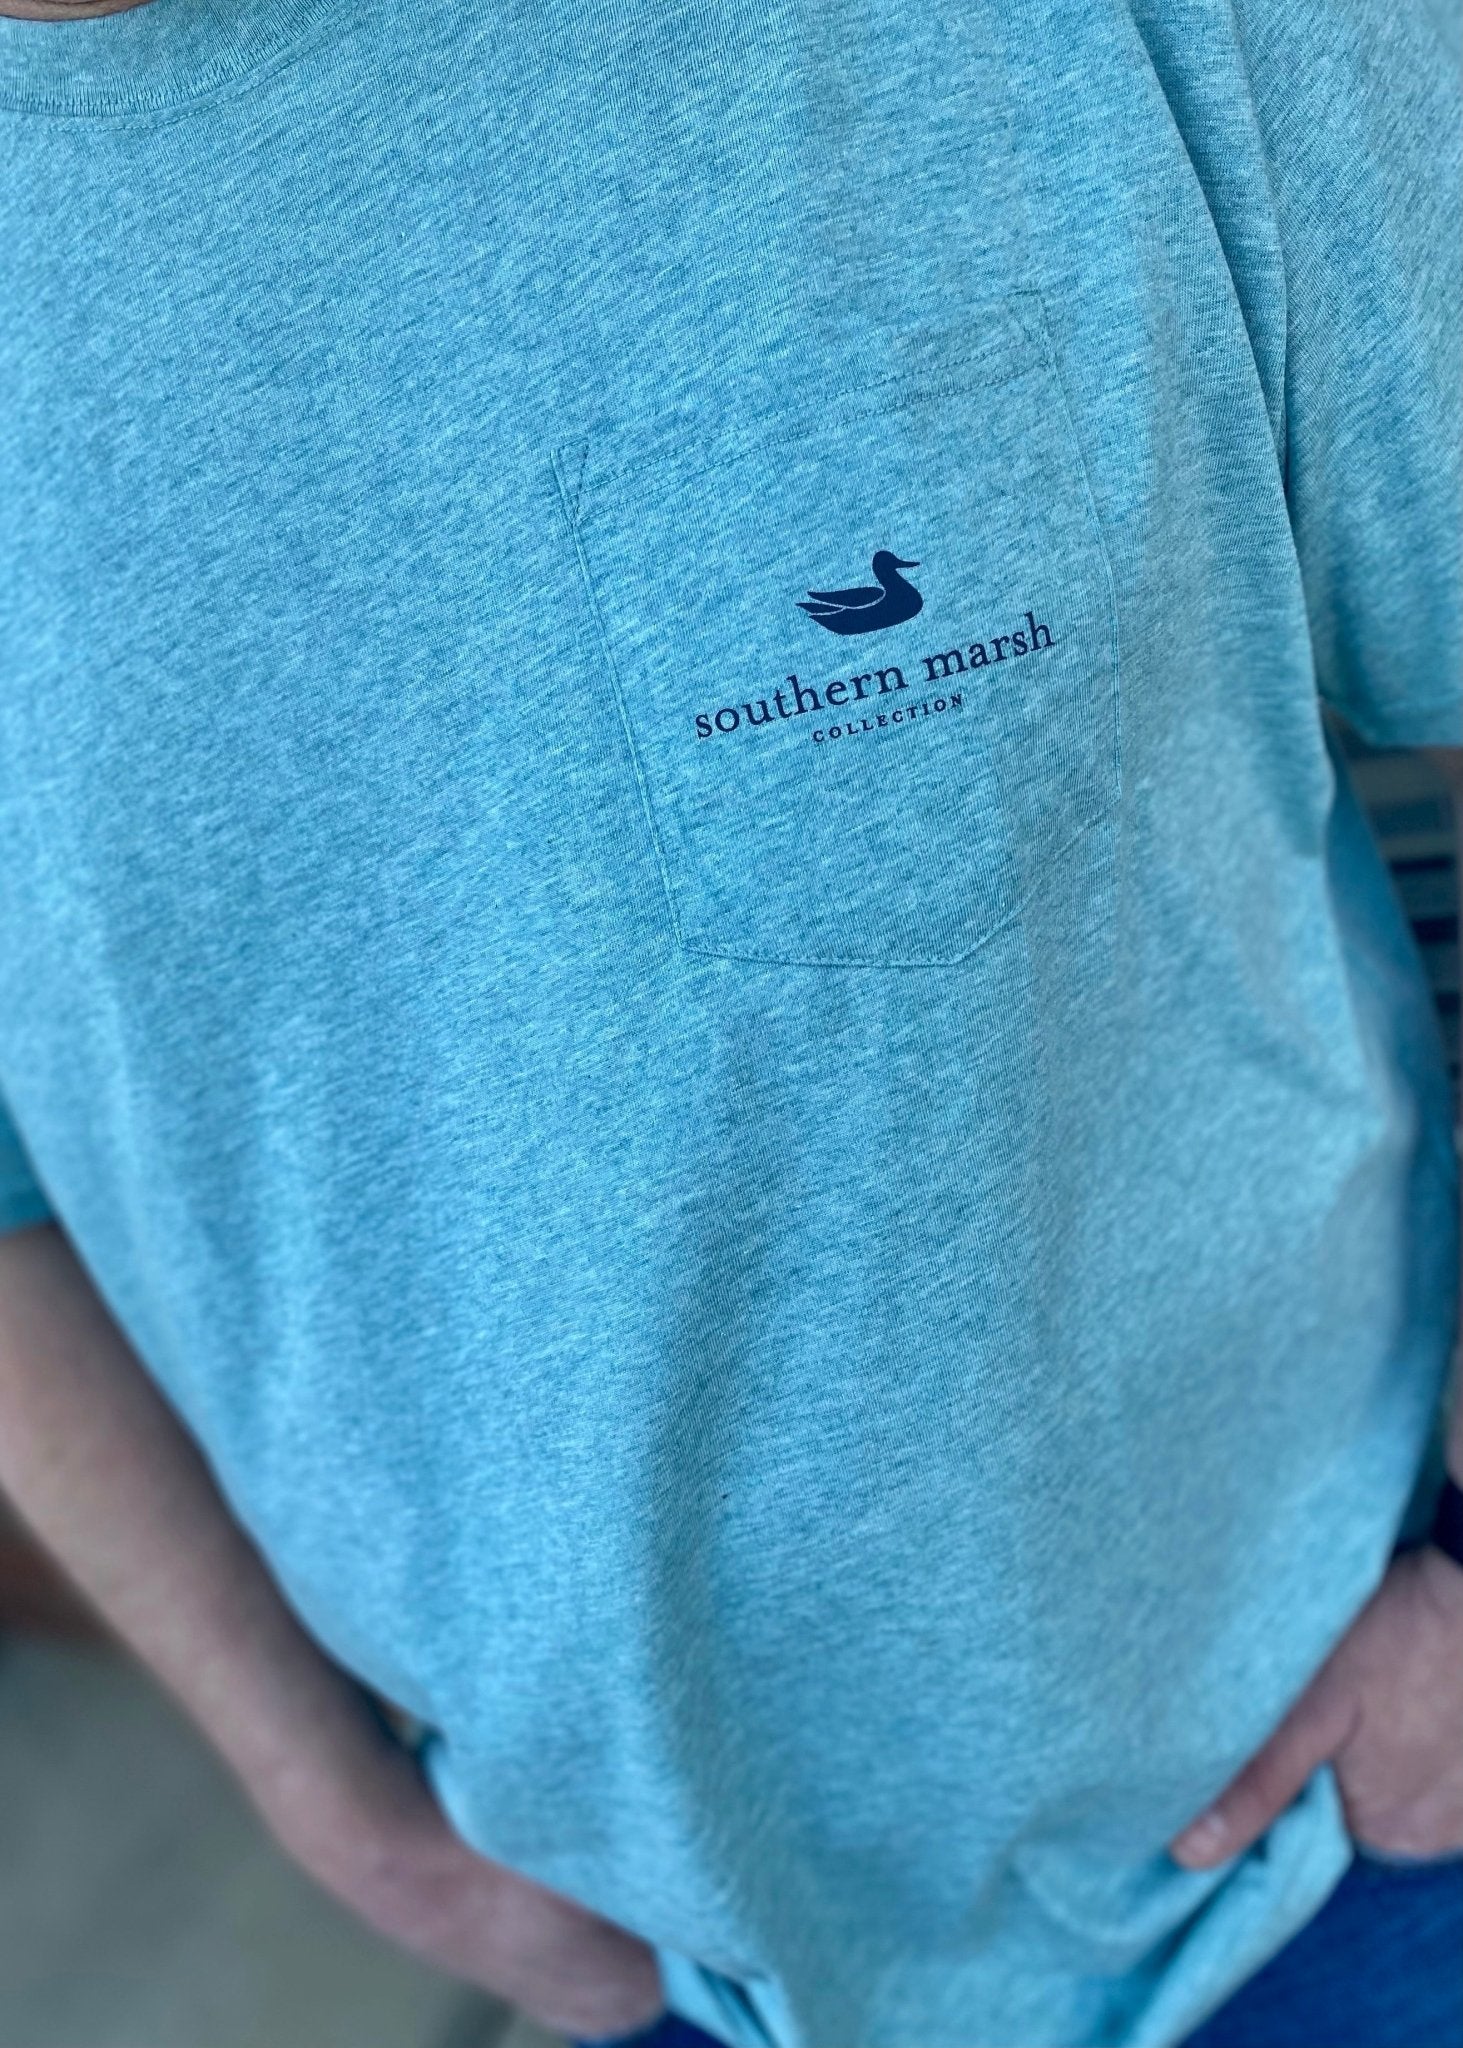 Southern Marsh Branding Collection Tee - Compass - Washed Moss Blue - Jimberly's Boutique